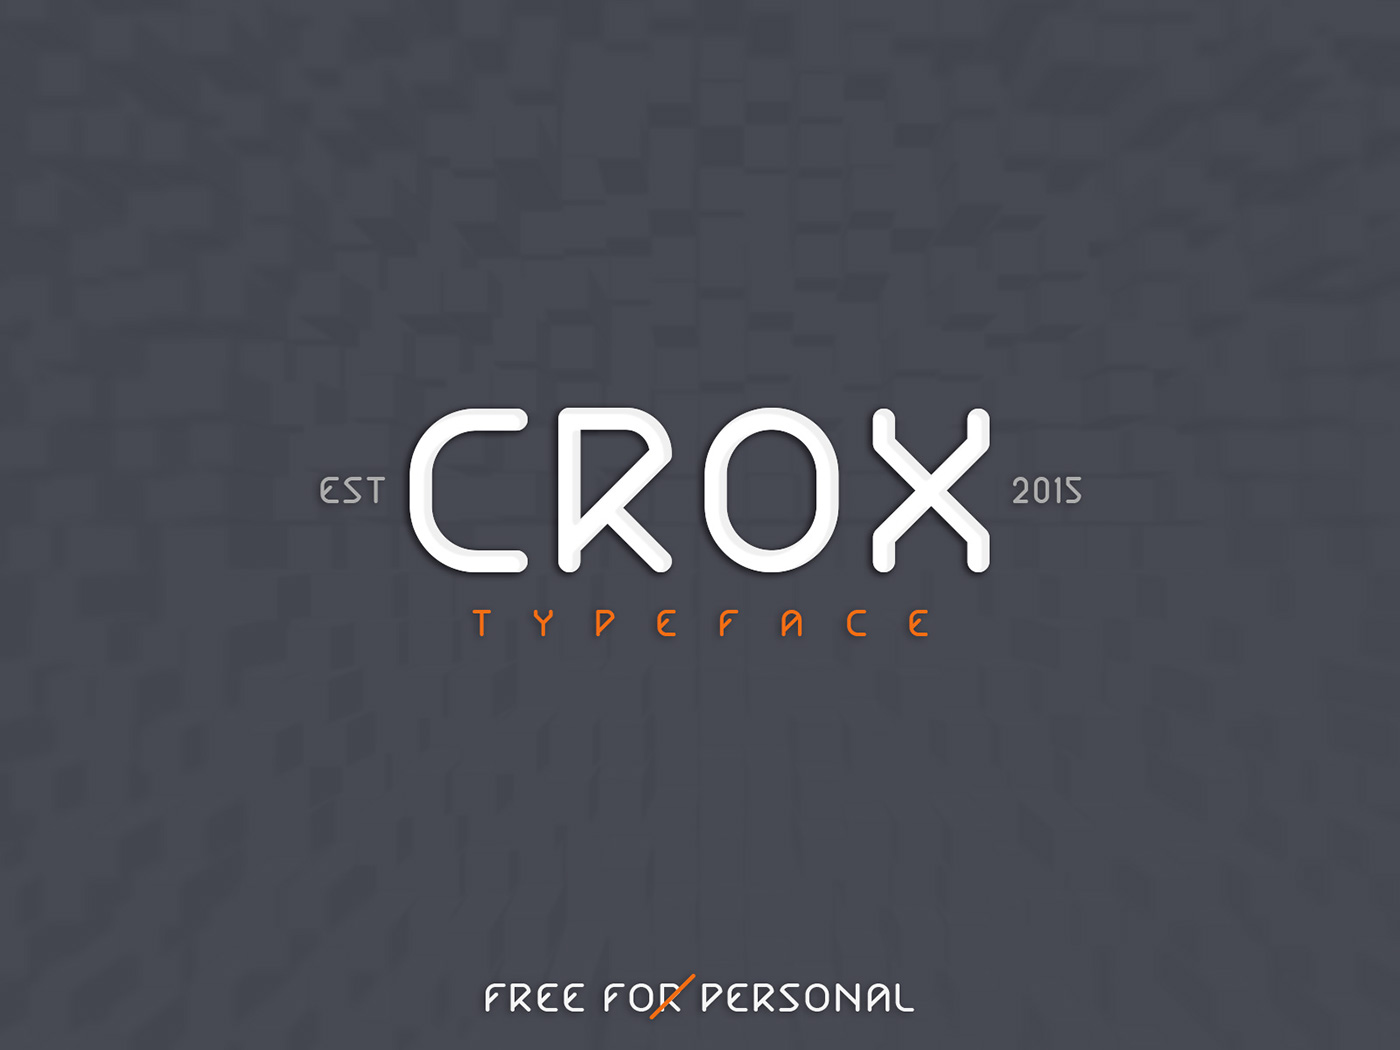 Title typo type Typeface Display font fontface minimal cross new freefont